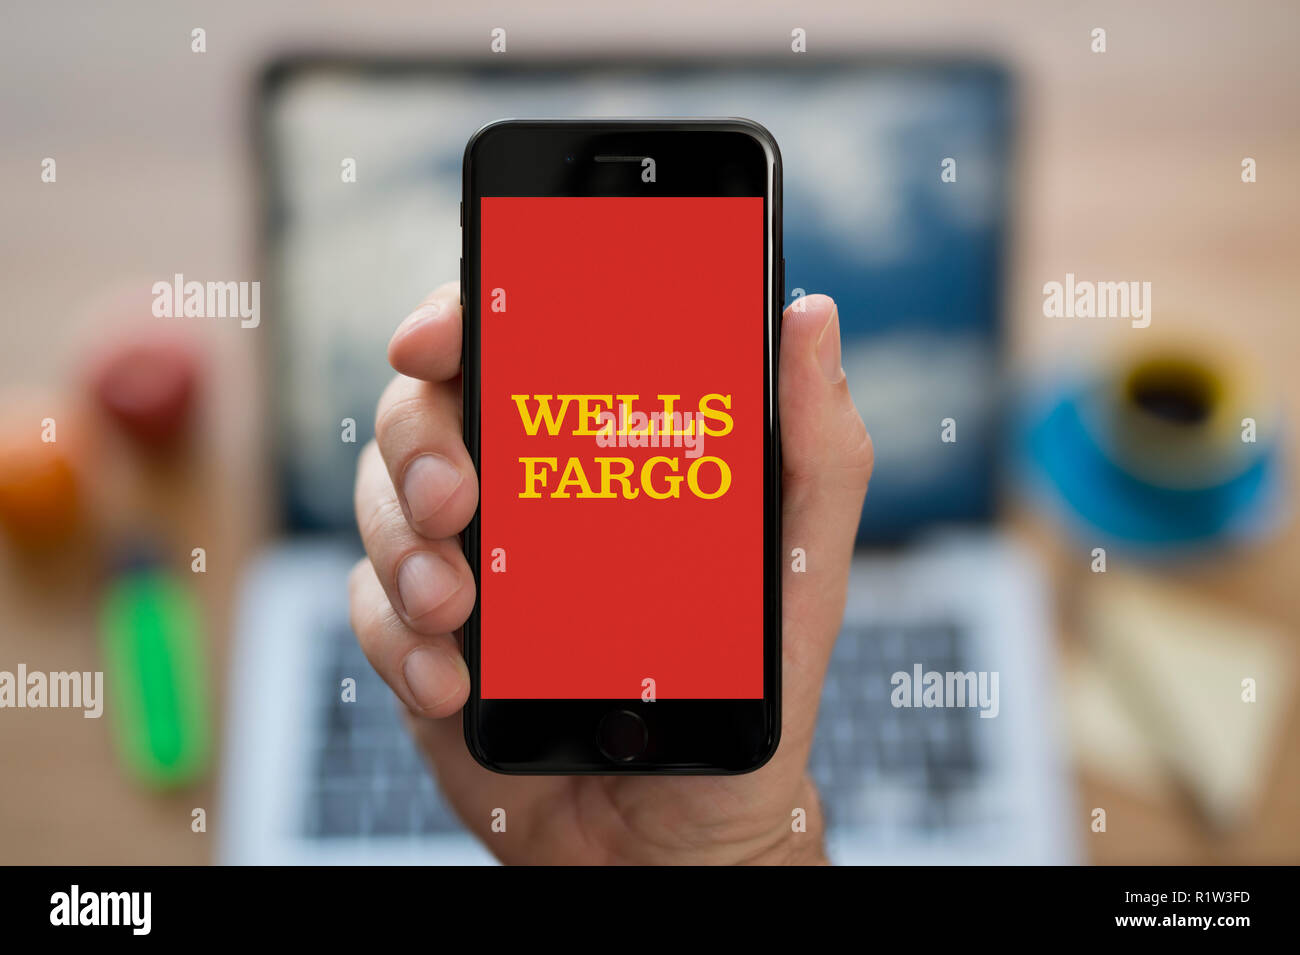 A man looks at his iPhone which displays the Wells Fargo logo, while sat at his computer desk (Editorial use only). Stock Photo